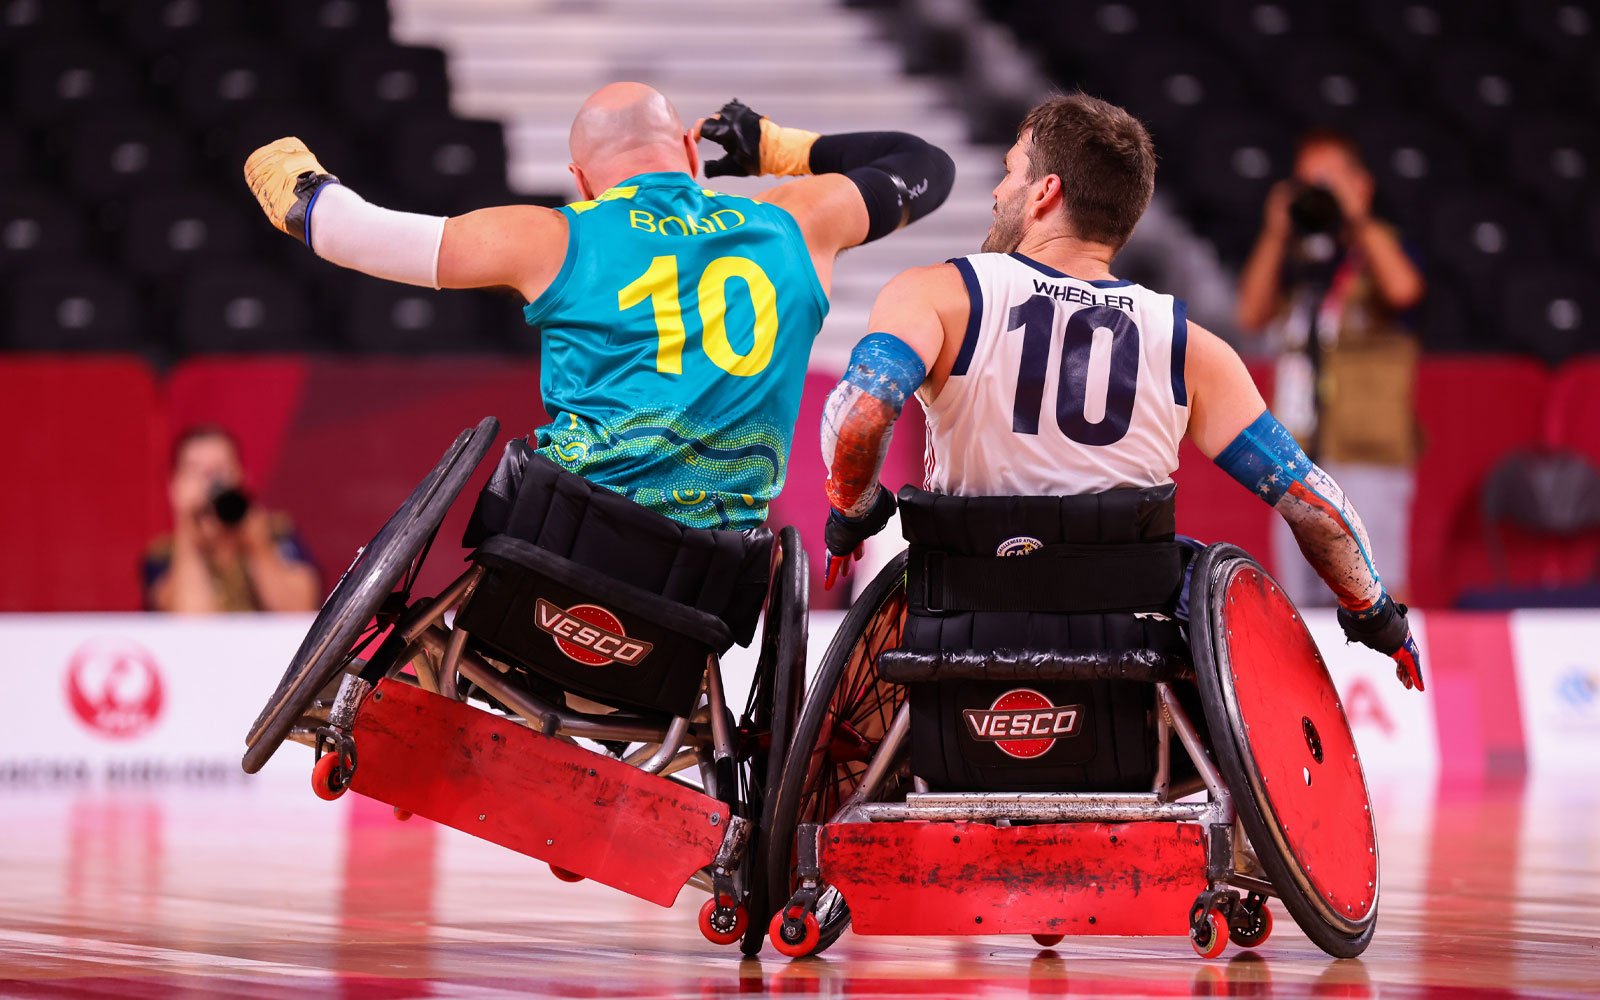 Two make wheelchair rugby players clash their chairs on court